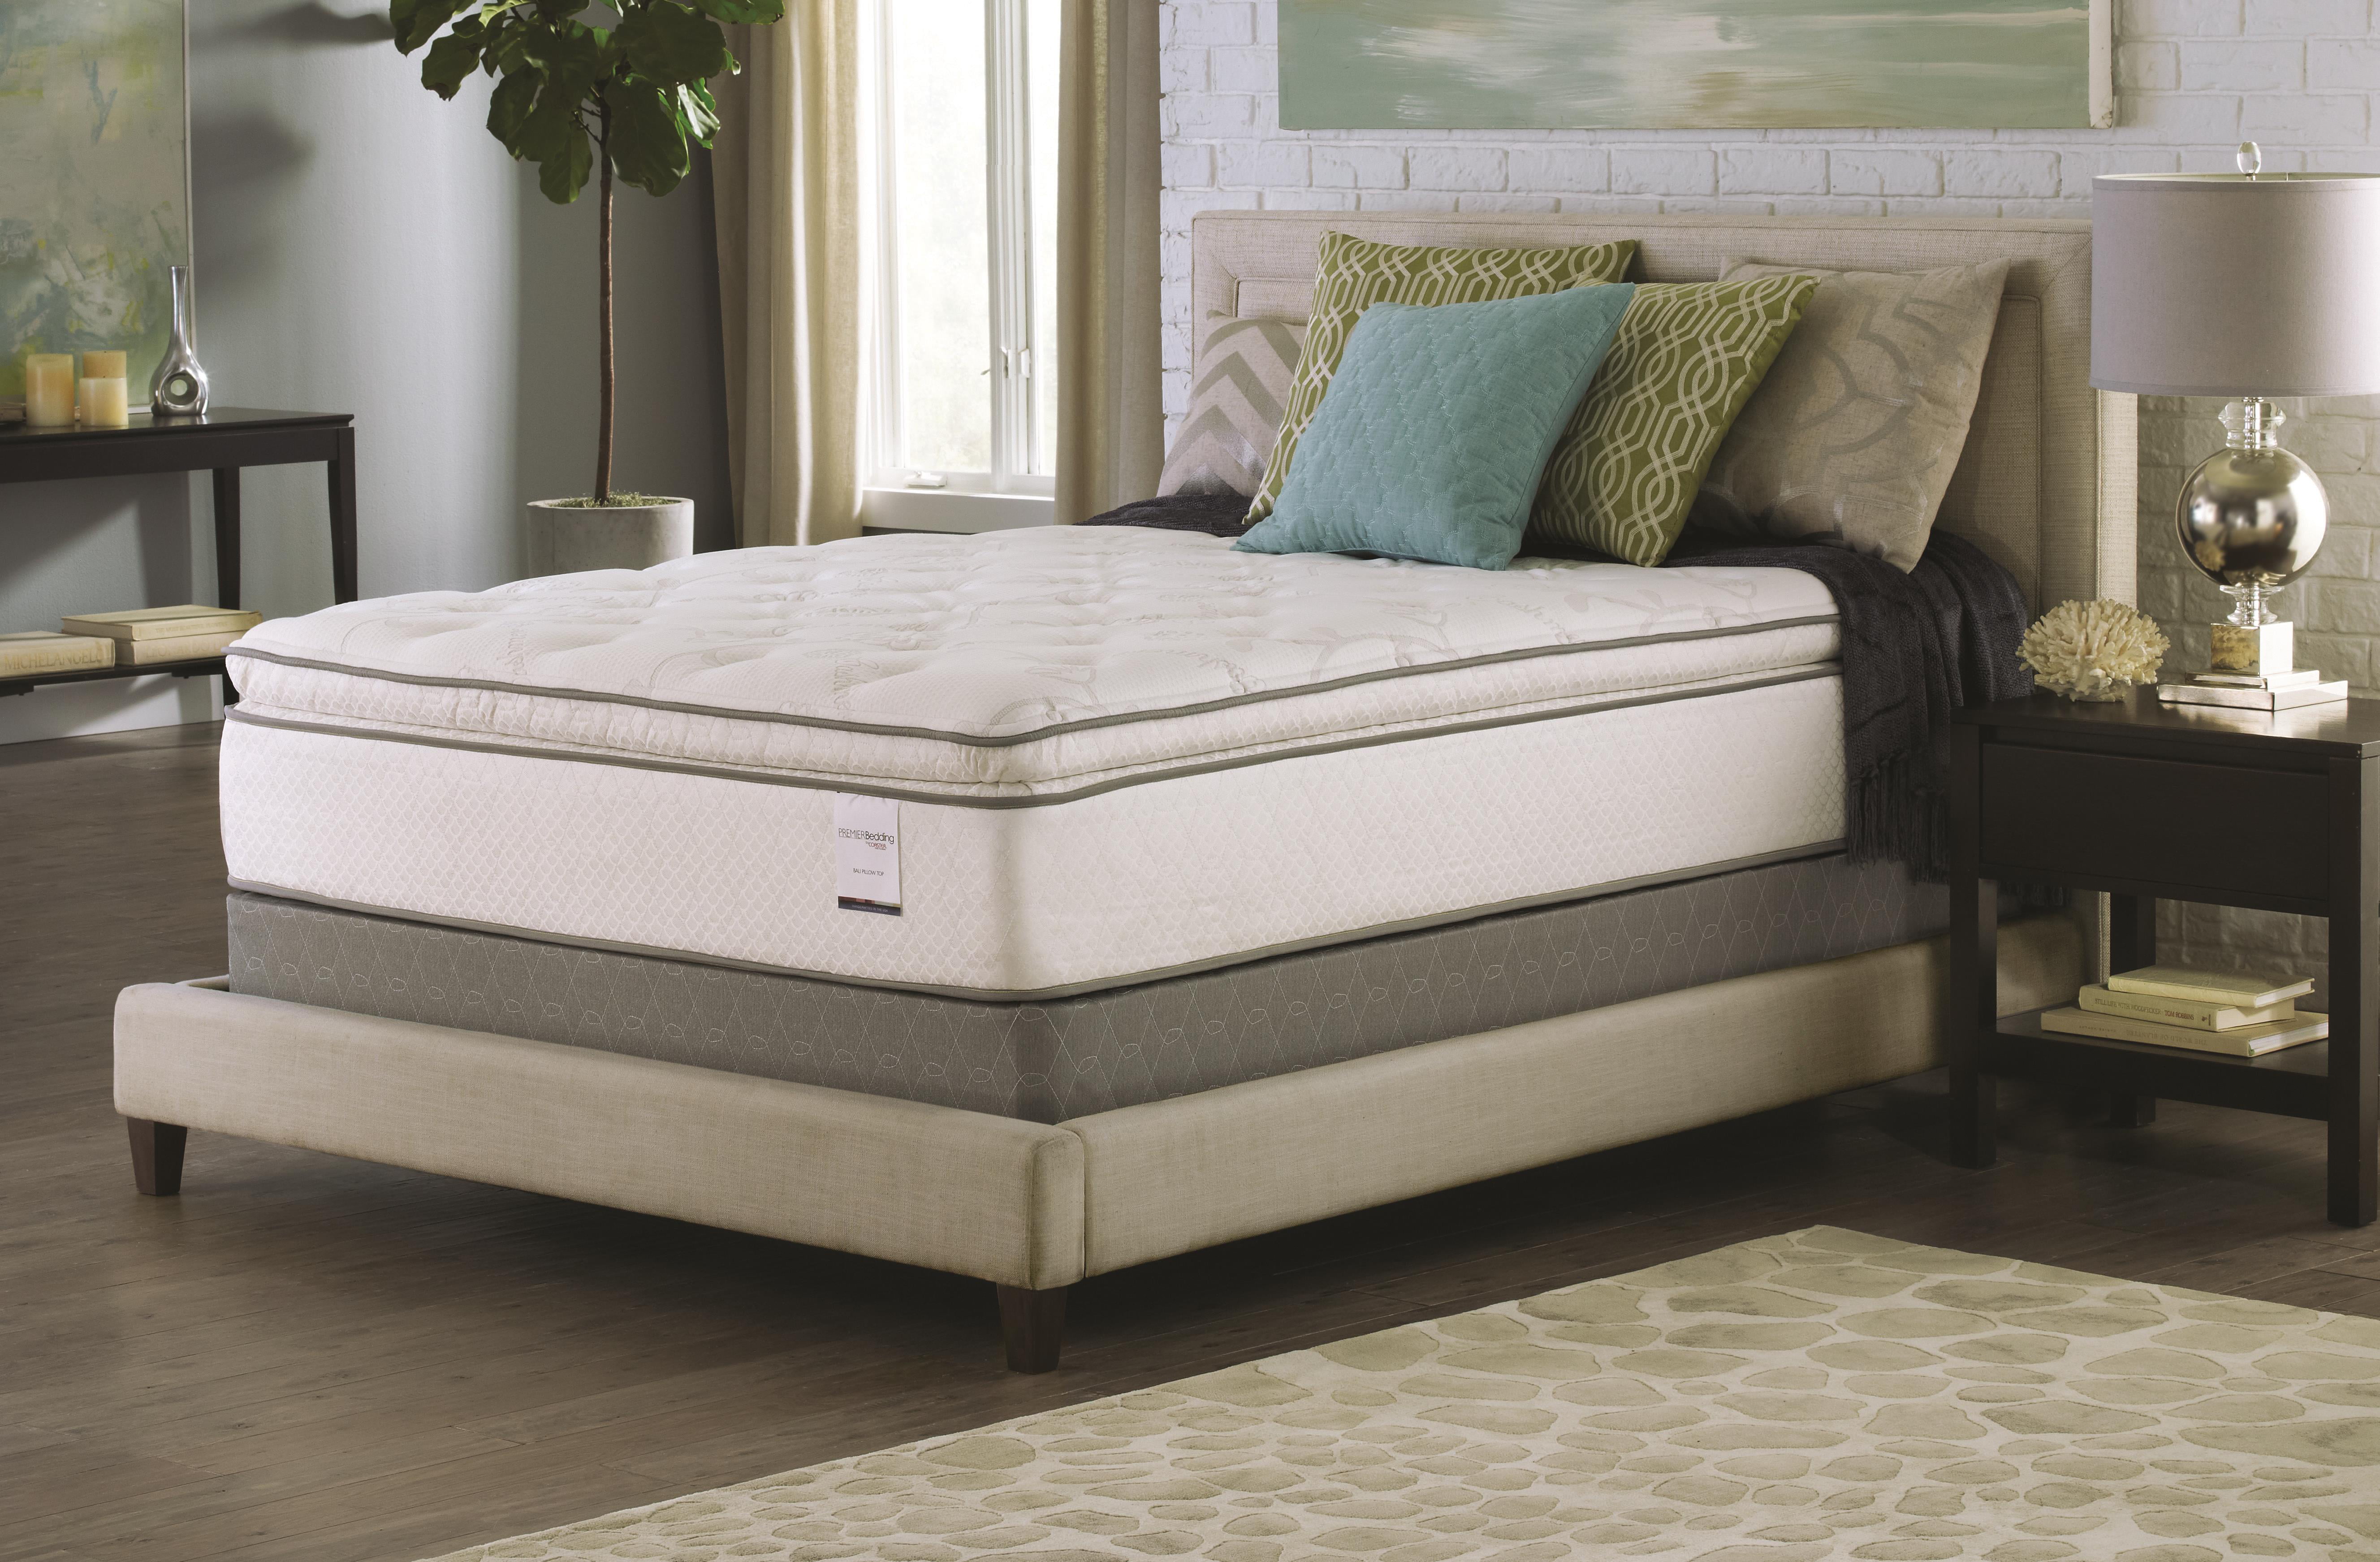 mattresses made to size